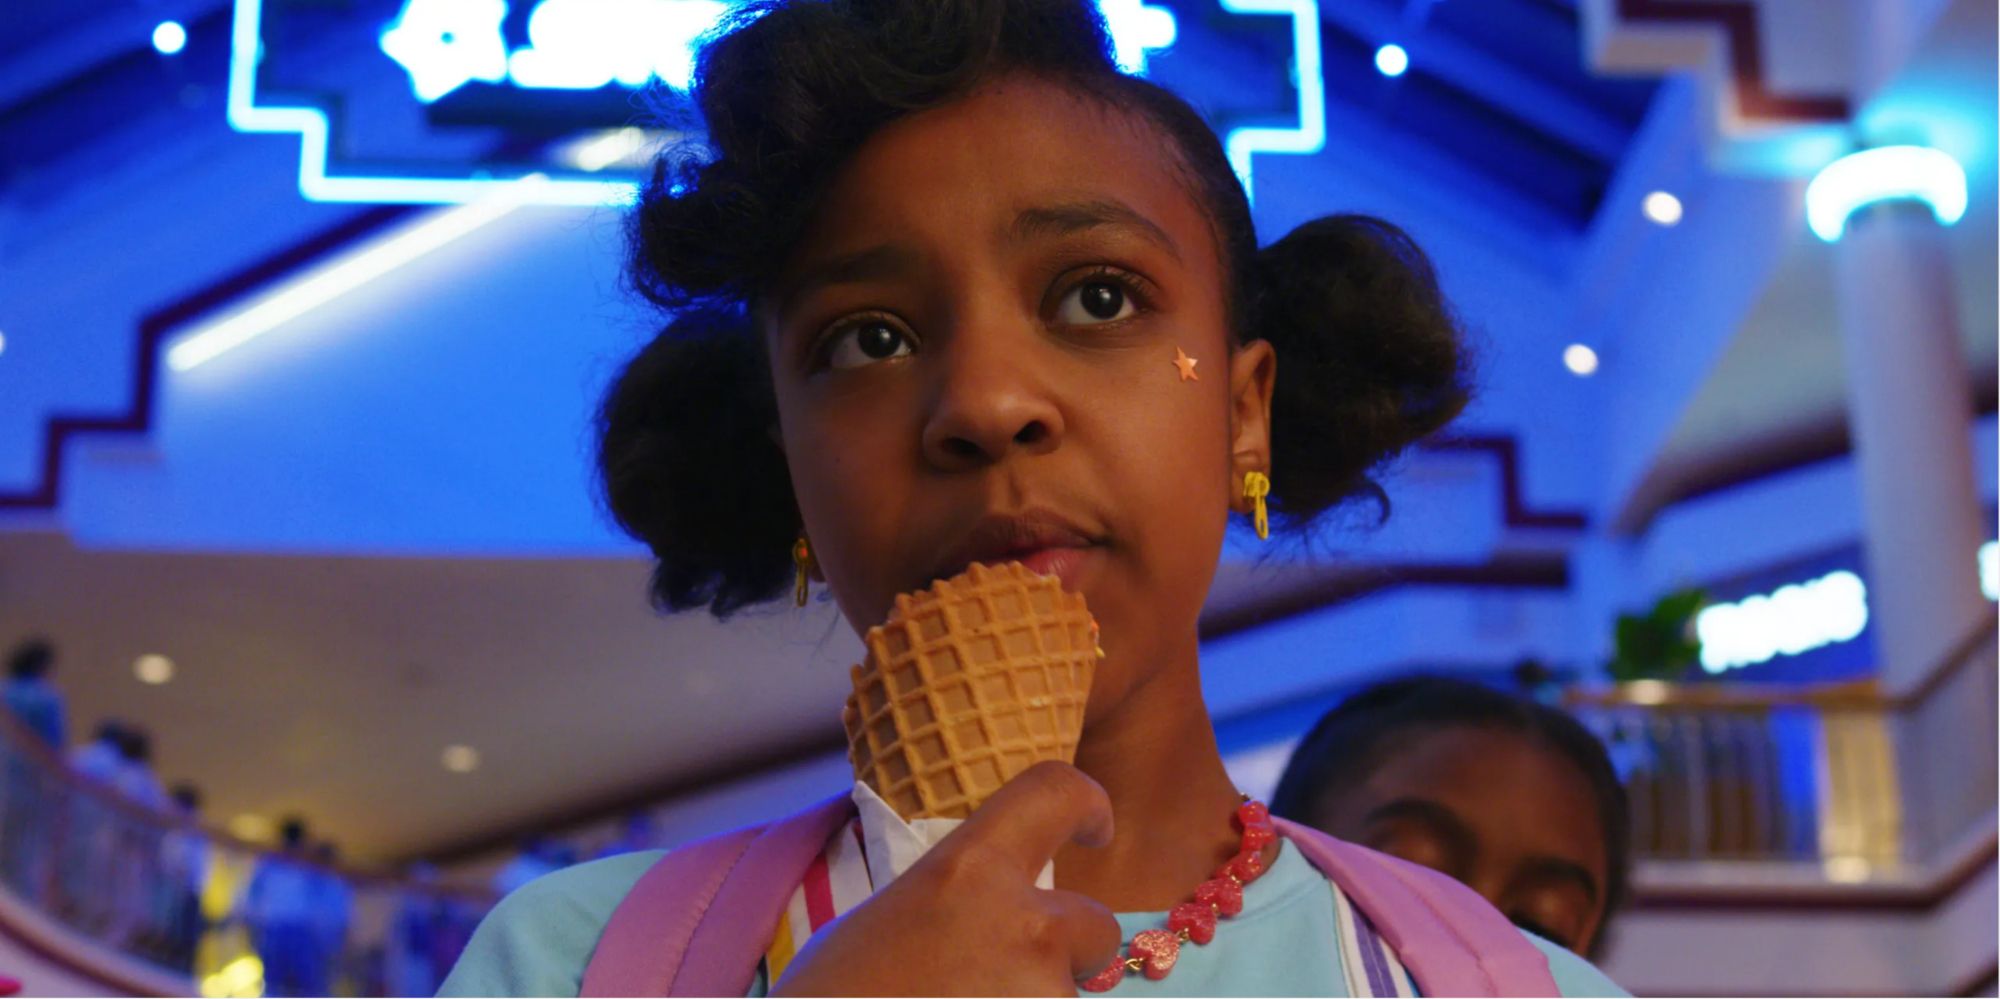 Erica Sinclair eating ice cream from a waffle cone 